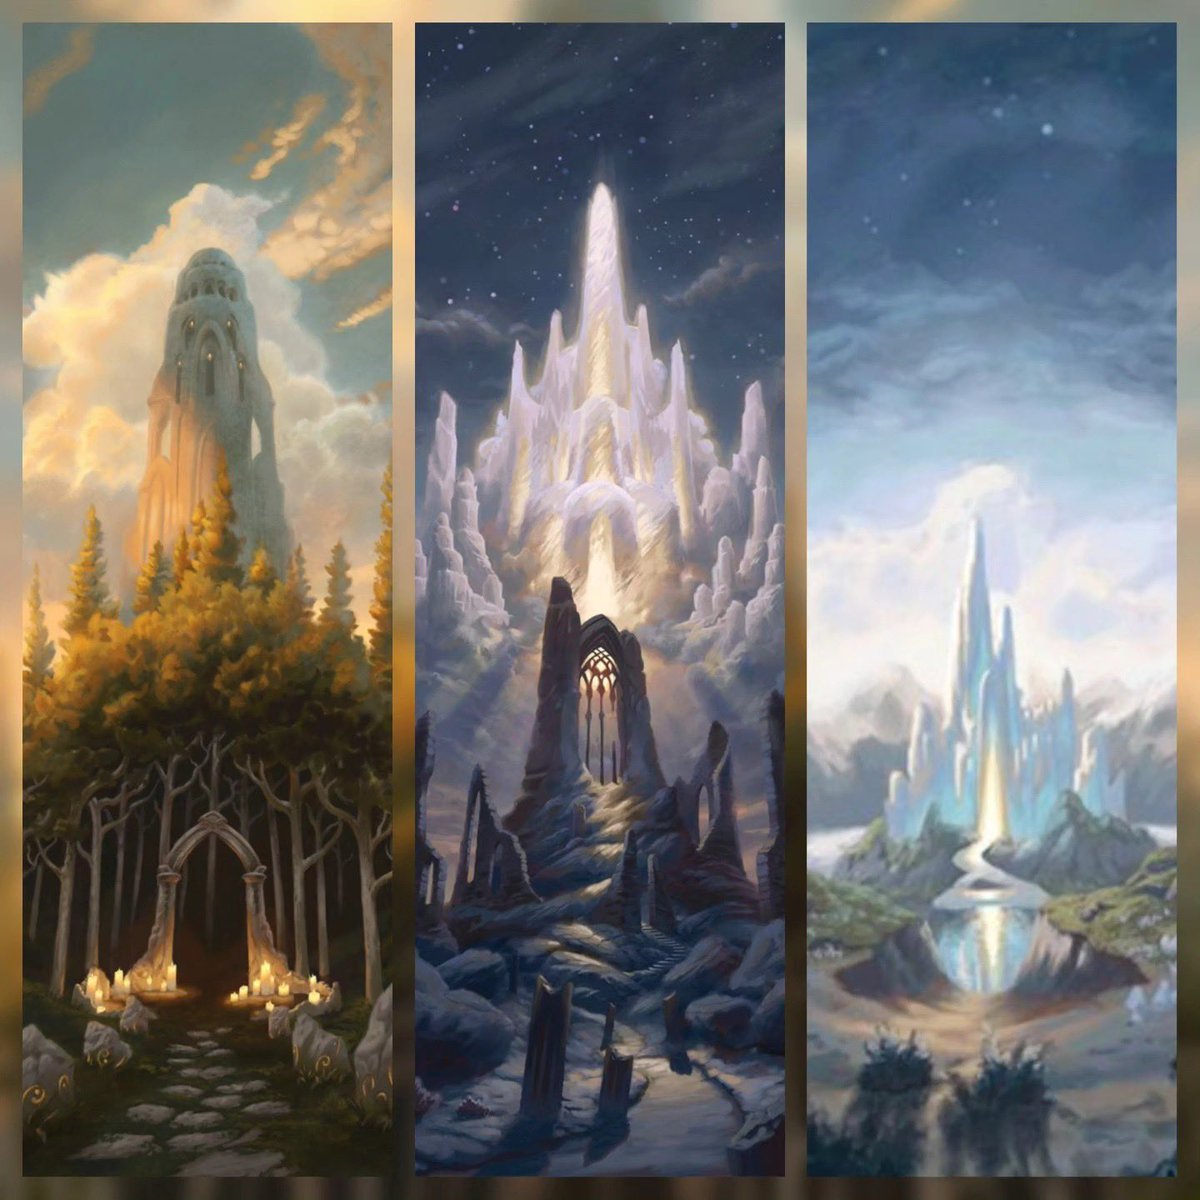 The Fey Door, Memory & Dream, and Unto Dawn--check out these new pieces in my web st0re.

#theelselands #mtg #magicthegathering #dungeonsanddragons #dnd #tarot #tarotcard #tarotcards #tarotdeck #tarotdecks #thetower #dungeonsynth #fantasyart